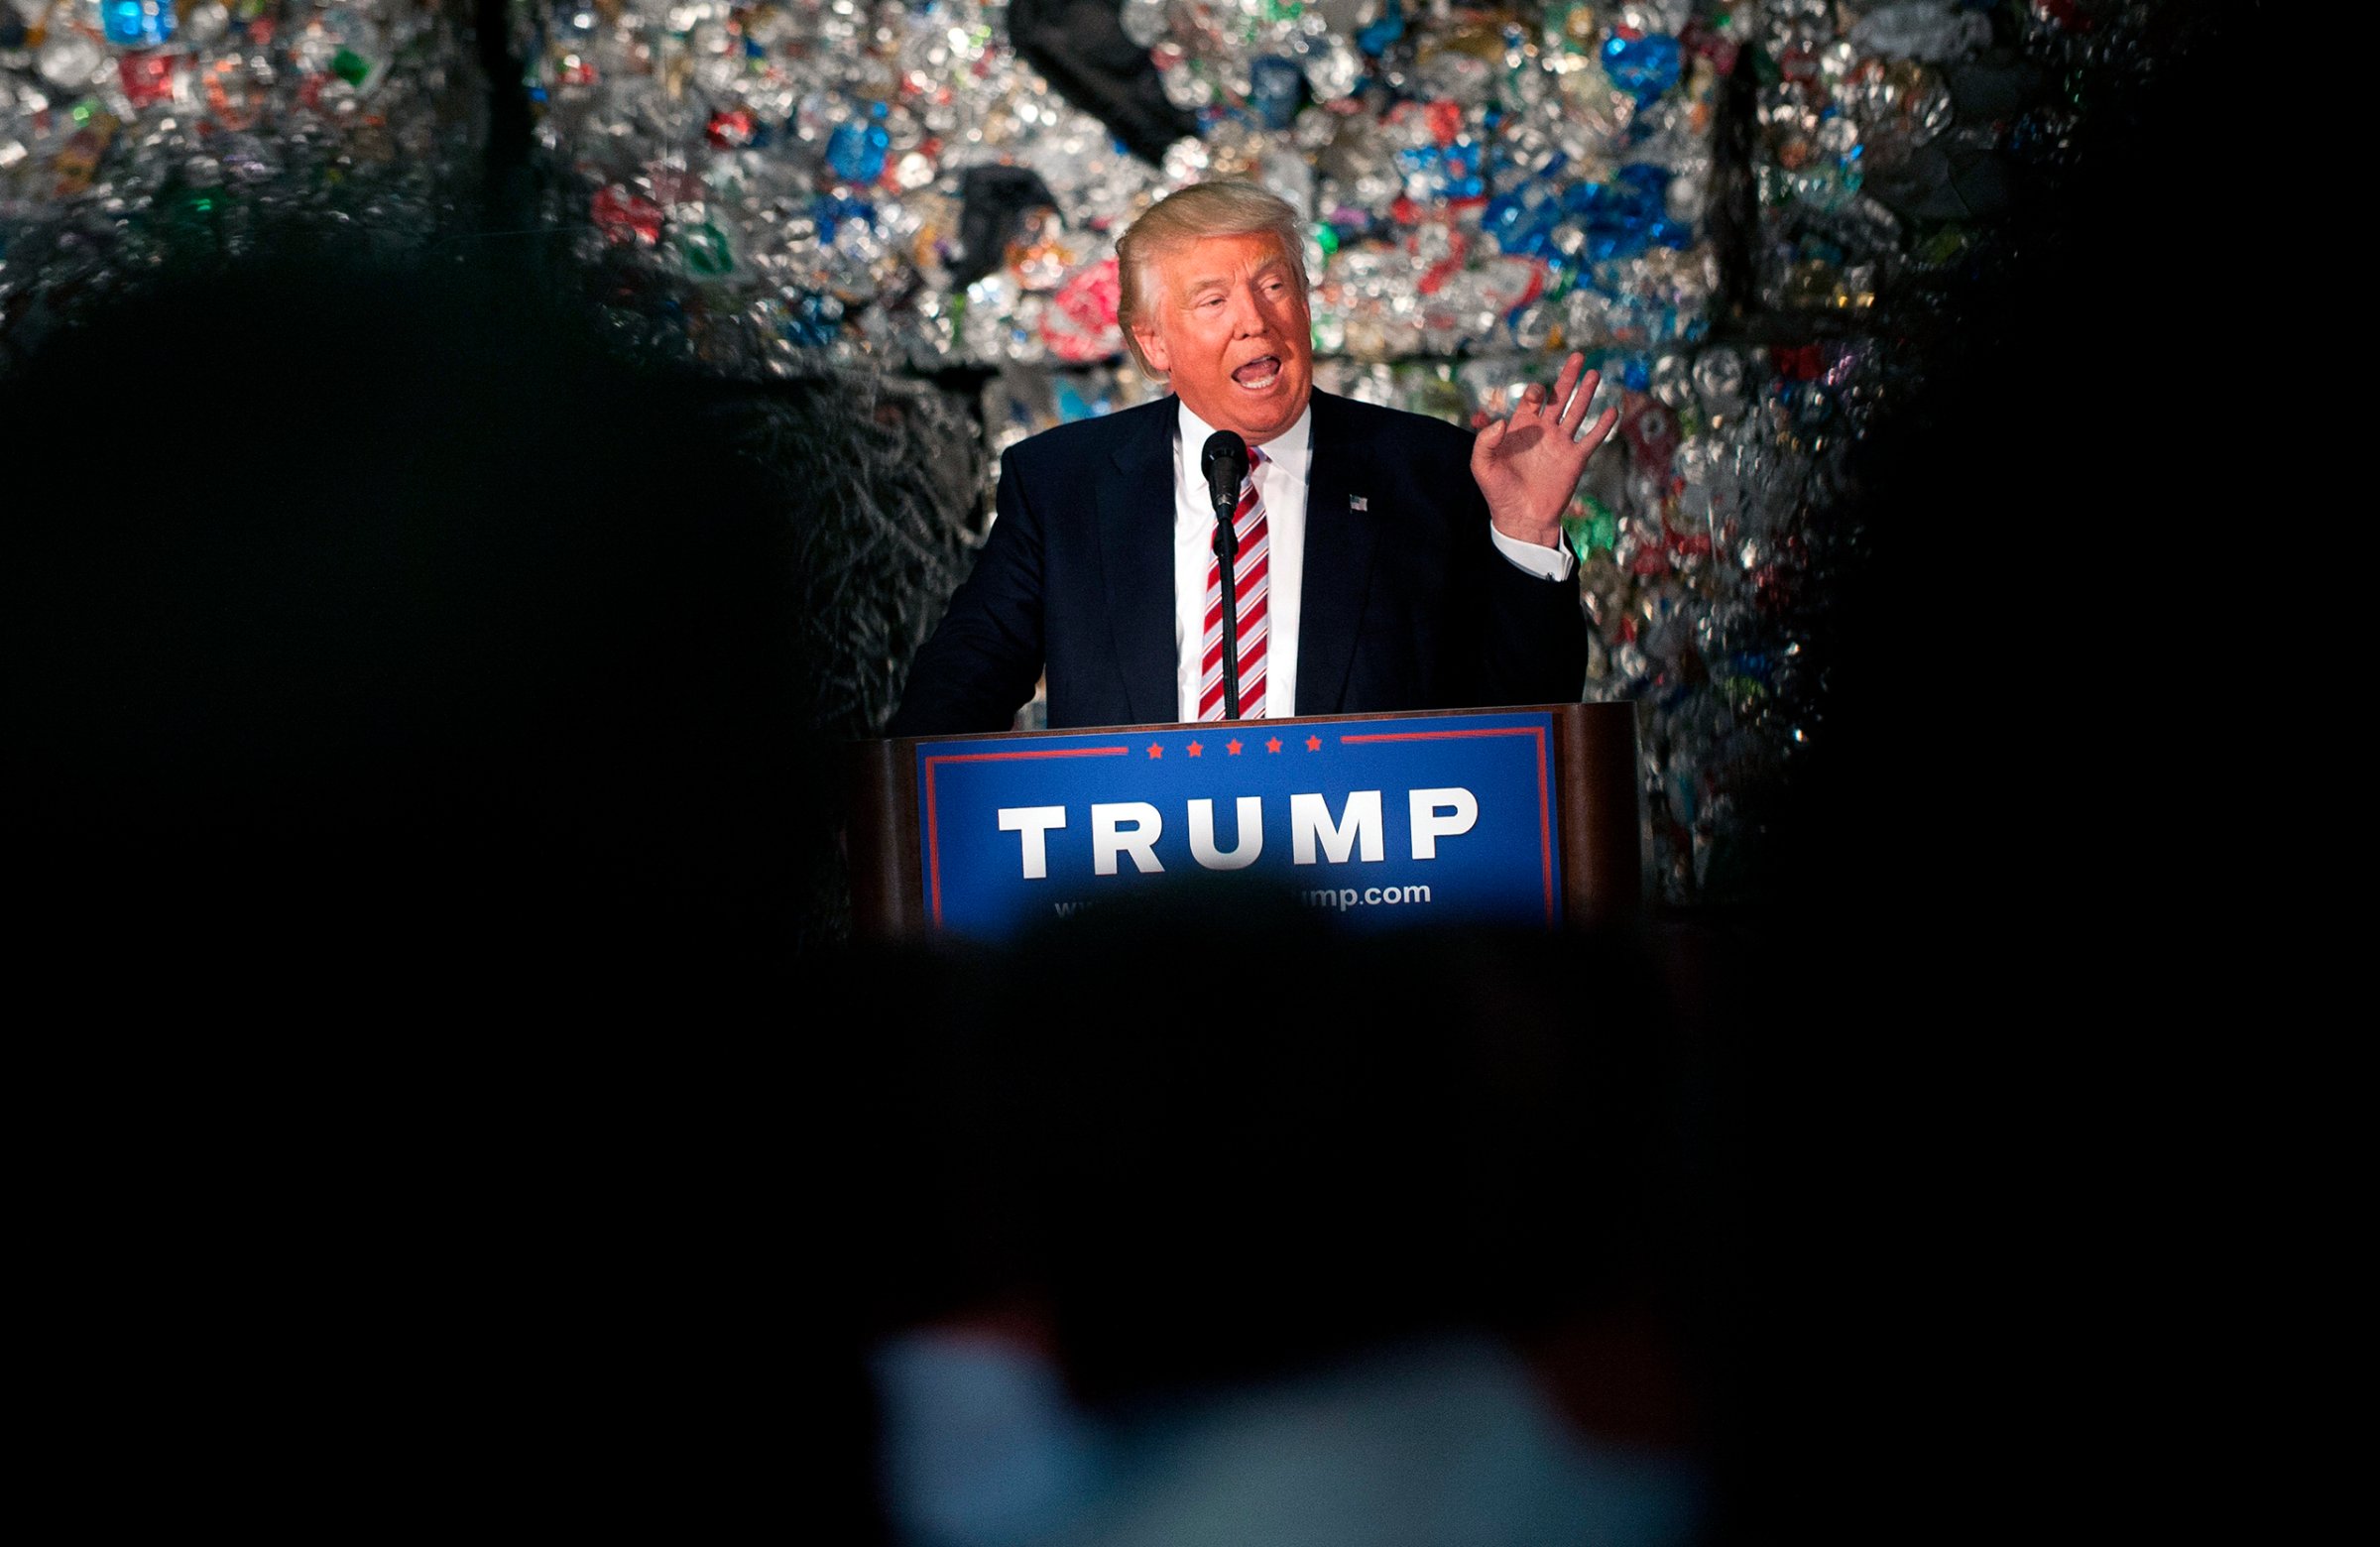 Presumptive GOP presidential nominee Donald Trump speaks during a policy speech at Alumisource in Monessen, Pa., on June 28, 2016.